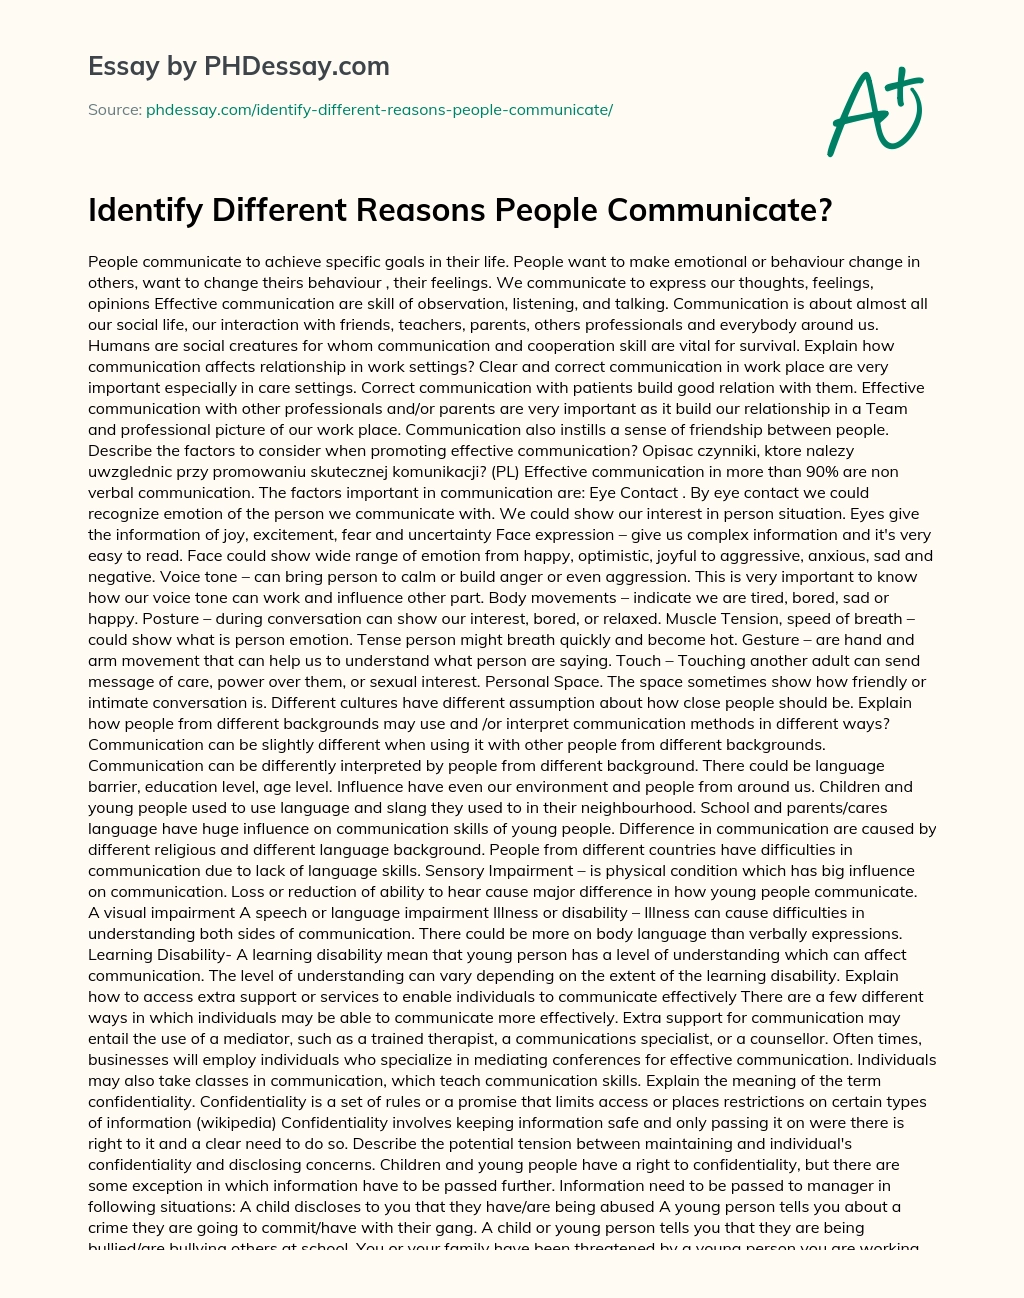 Identify Different Reasons People Communicate? essay